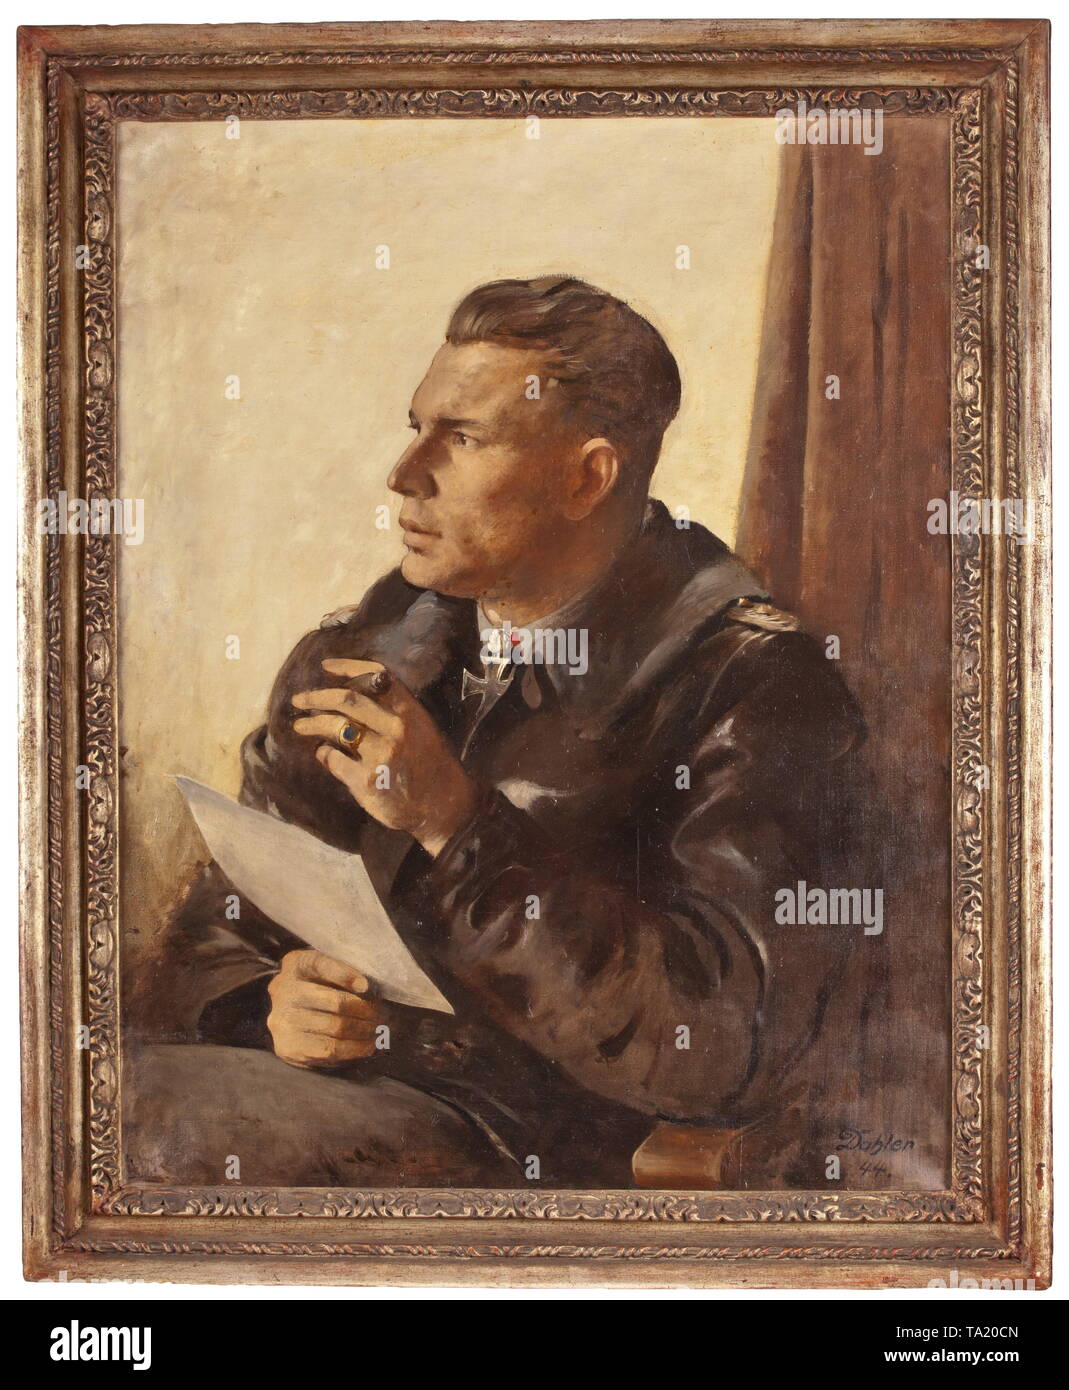 Fighter pilot and Oak Leaves winner Colonel Gustav Rödel - an oil painting 1944 Large-format portrait, Rödel as colonel and Oak Leaves winner seated and clad in the flying gear of a fighter pilot, holding a cigar and an order of the day in his hands. Artist's signature 'Dahler 44.' on the lower right. In a decorated wooden frame 89 x 72 cm. Gustav Rödel, born 1915, served in the Luftwaffe from 1935 onwards, took part in the Spanish Civil War as a member of the Condor Legion and was awarded the Iron Cross on 22 June 1941 after 20 aerial victories in the West, on the Balkan P, Editorial-Use-Only Stock Photo